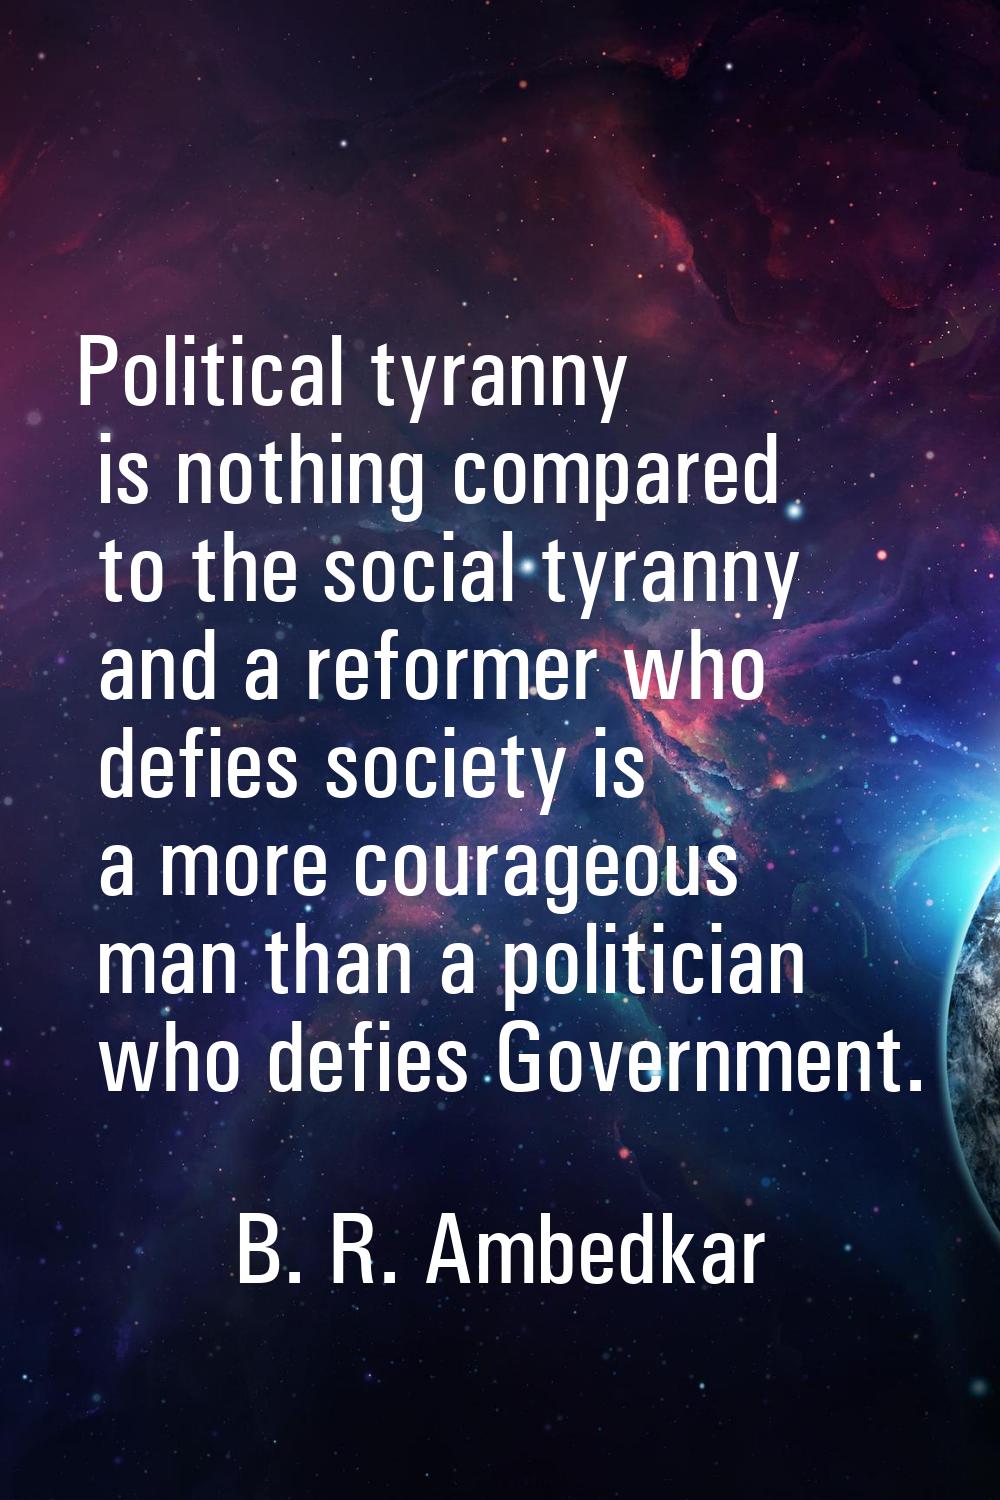 Political tyranny is nothing compared to the social tyranny and a reformer who defies society is a 